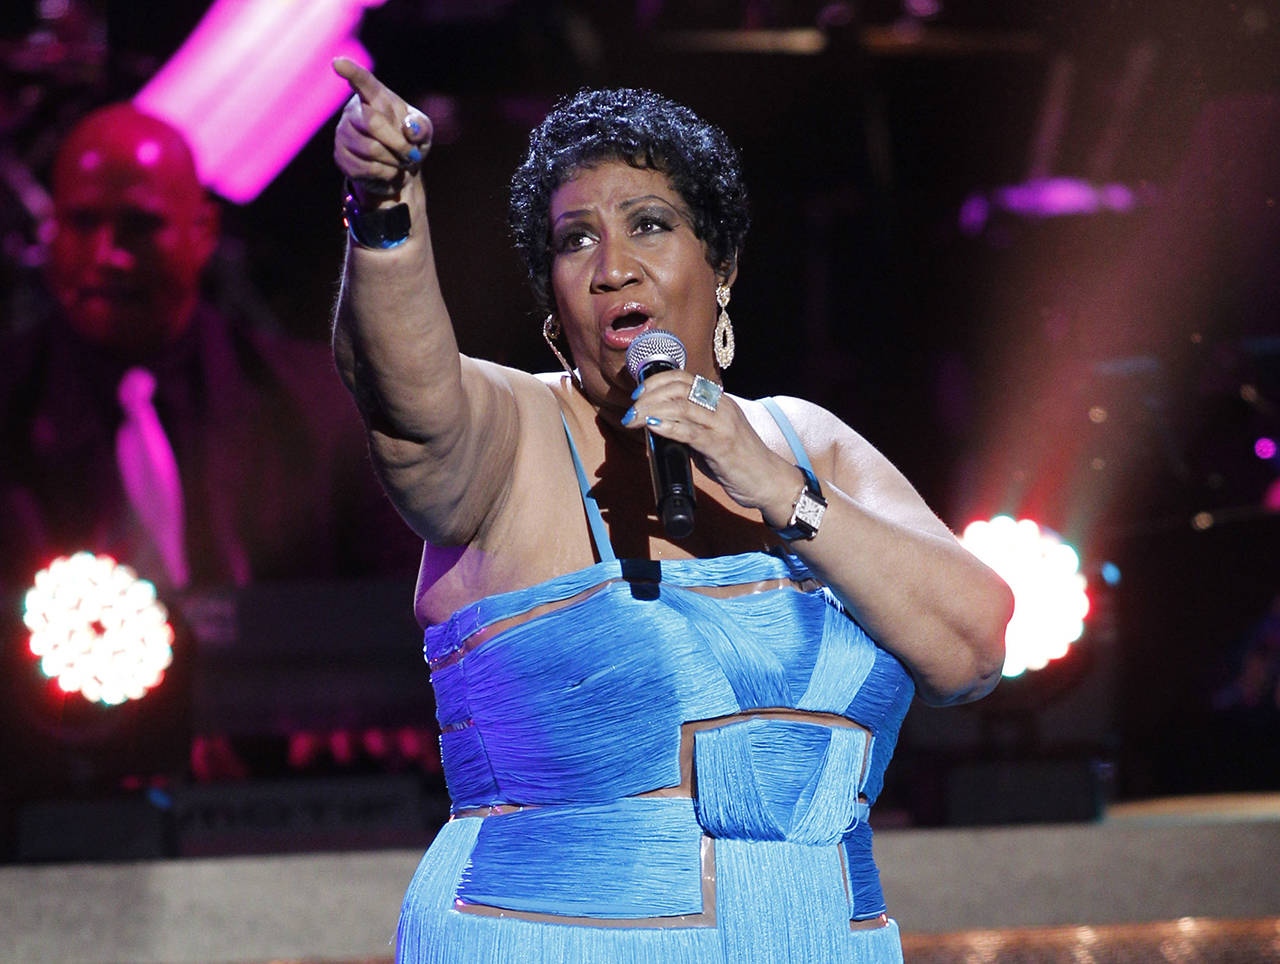 This 2012 photo shows singer Aretha Franklin performing during the BET Honors at the Warner Theatre in Washington. Franklin died Thursday, Aug. 16, at her home in Detroit. She was 76. (AP Photo/Jose Luis Magana, File)